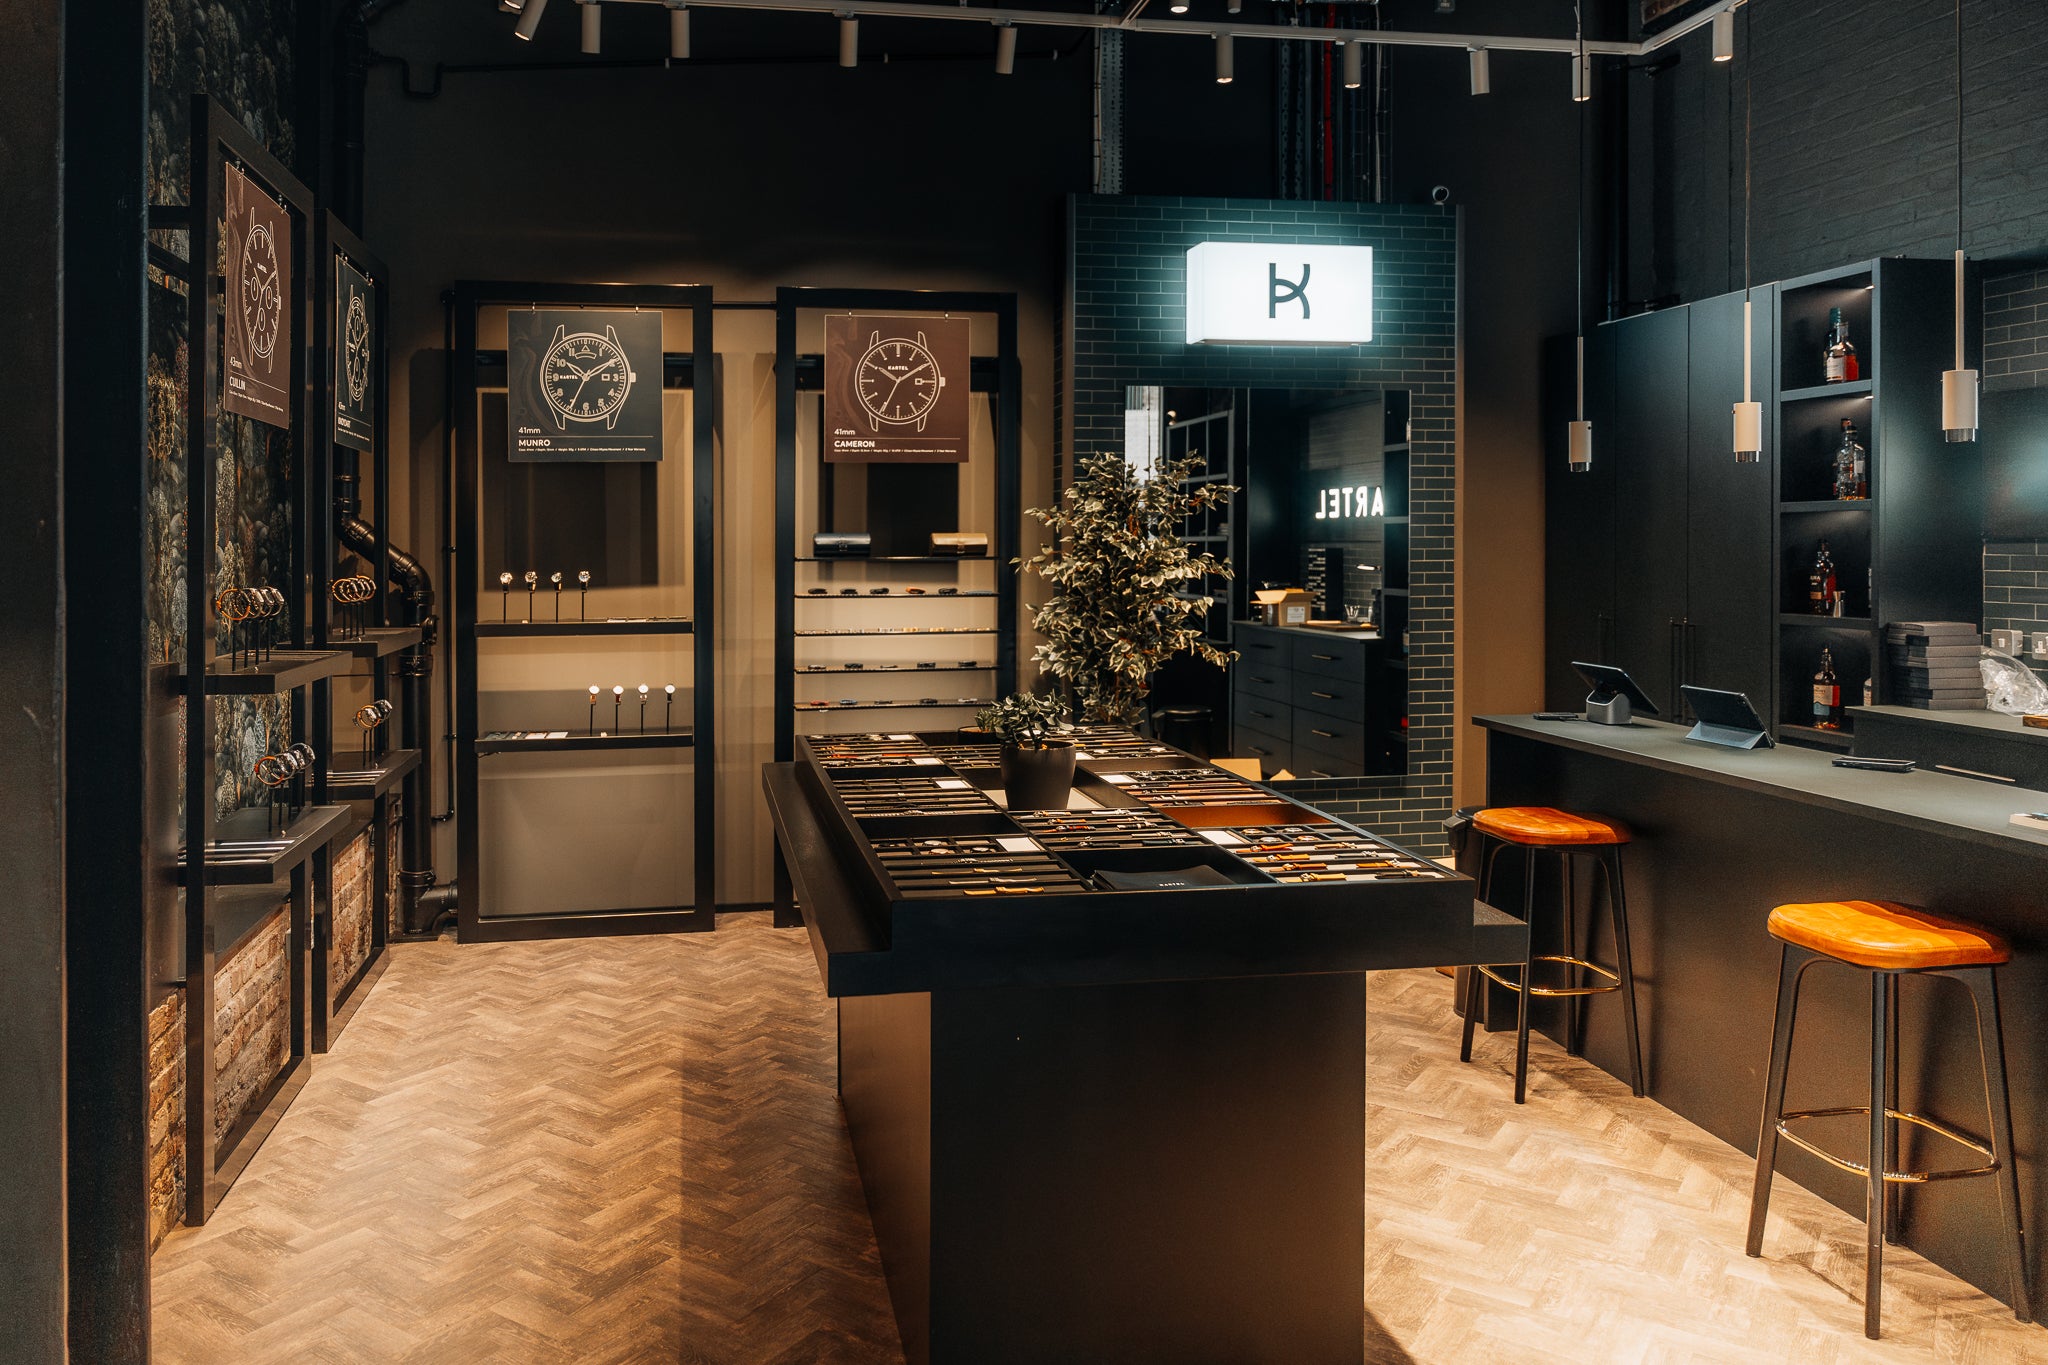 Kartel Watches Sets New Trends with Coal Drops Yard Store: Discover Modern Craftsmanship and Personalization"